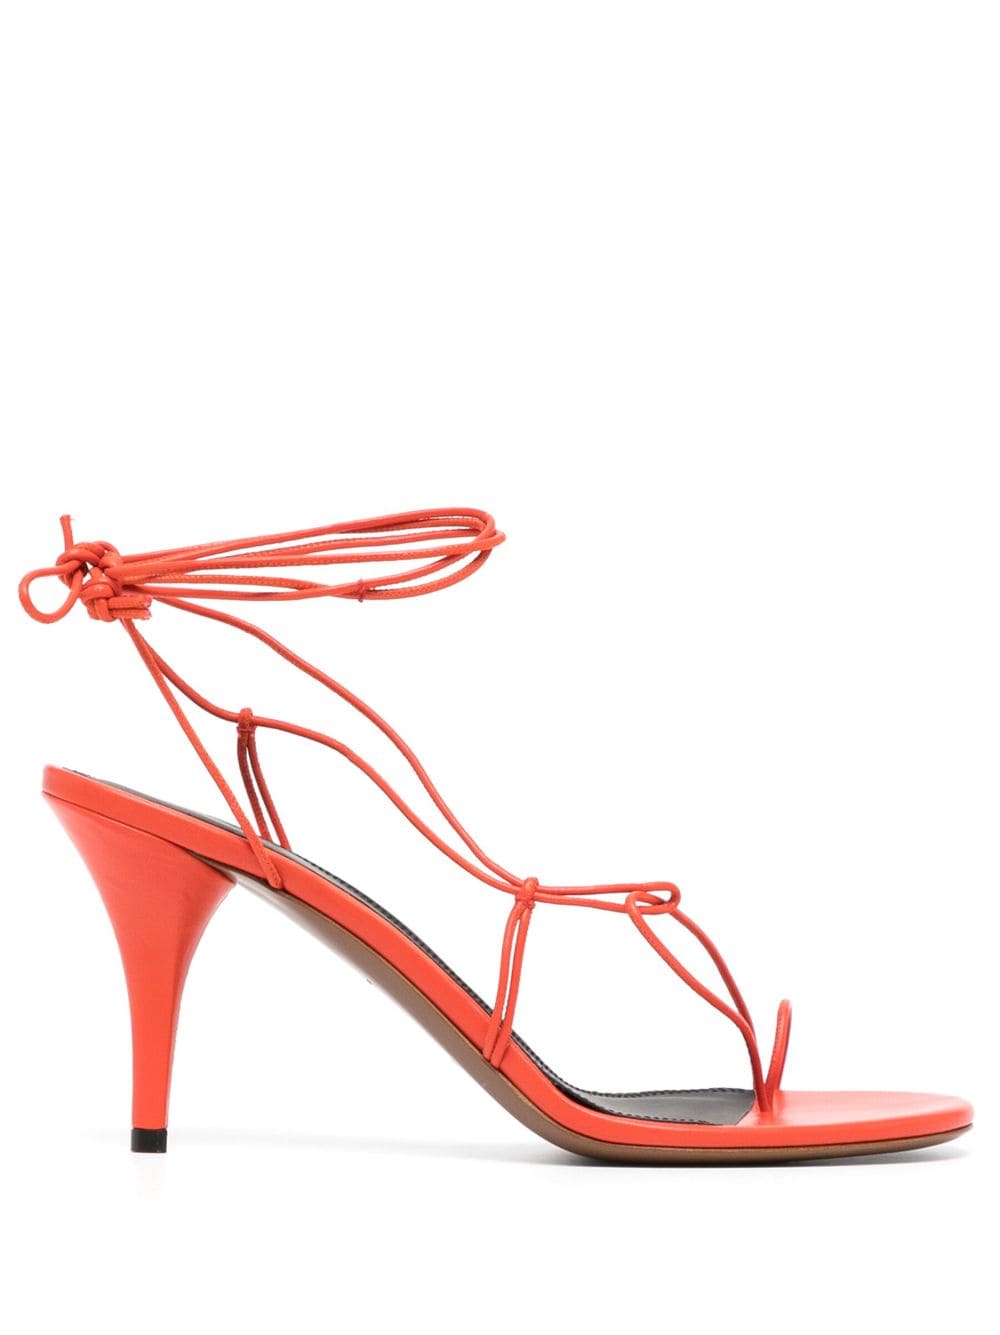 Image 1 of NEOUS Giena 80mm strappy sandals